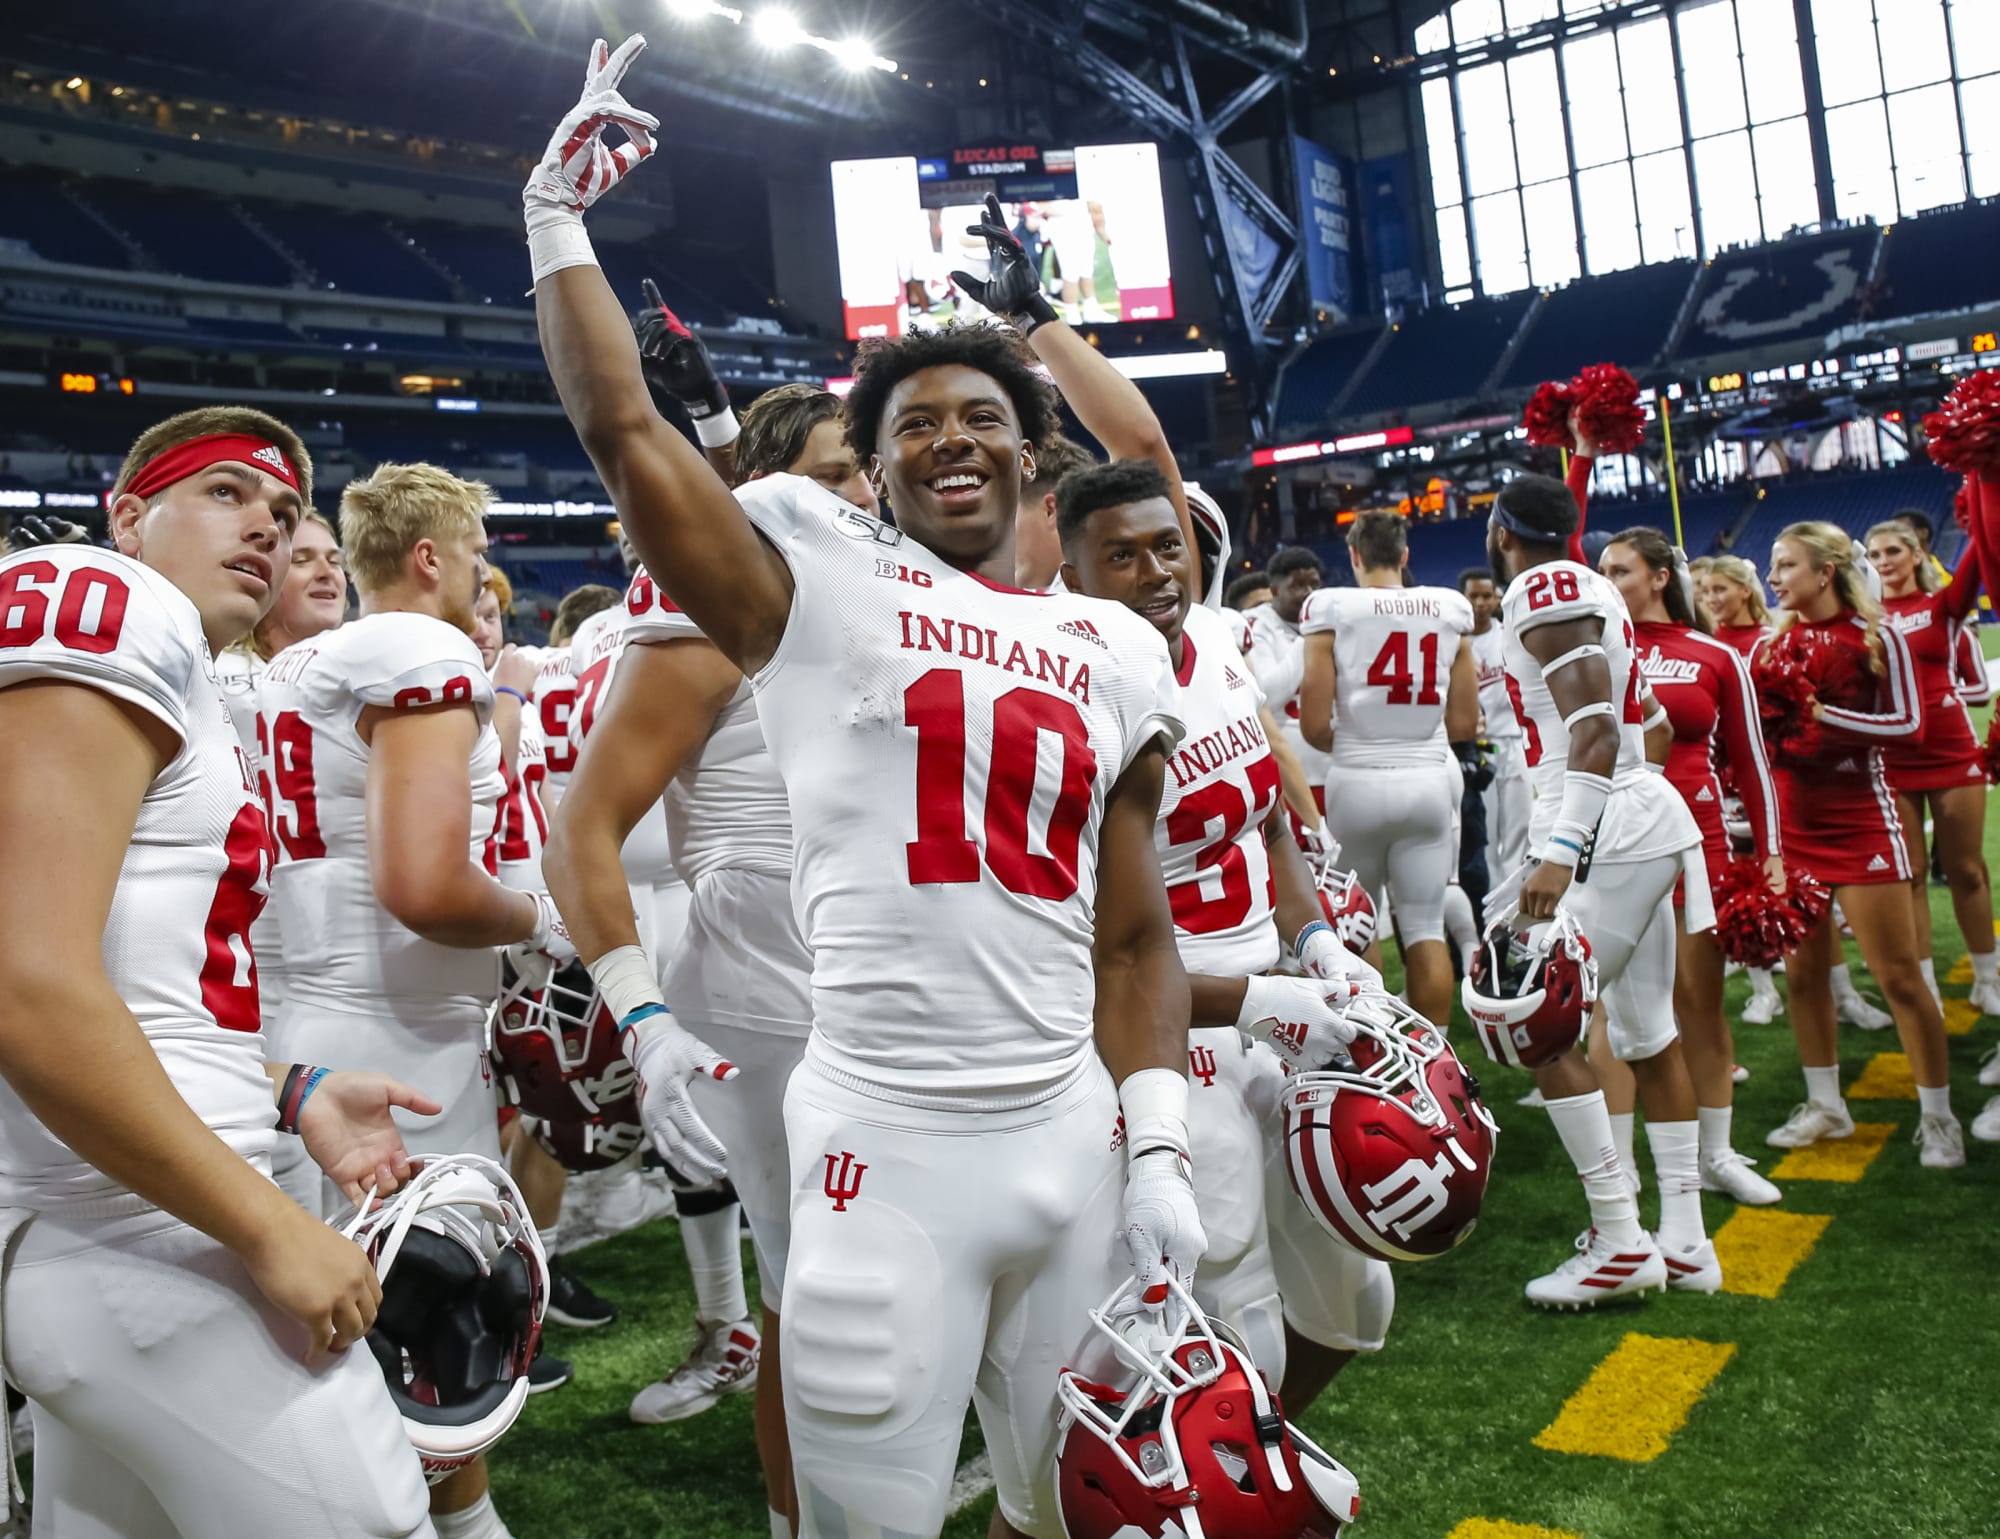 Indiana Football: Ranking each game on the schedule by difficulty